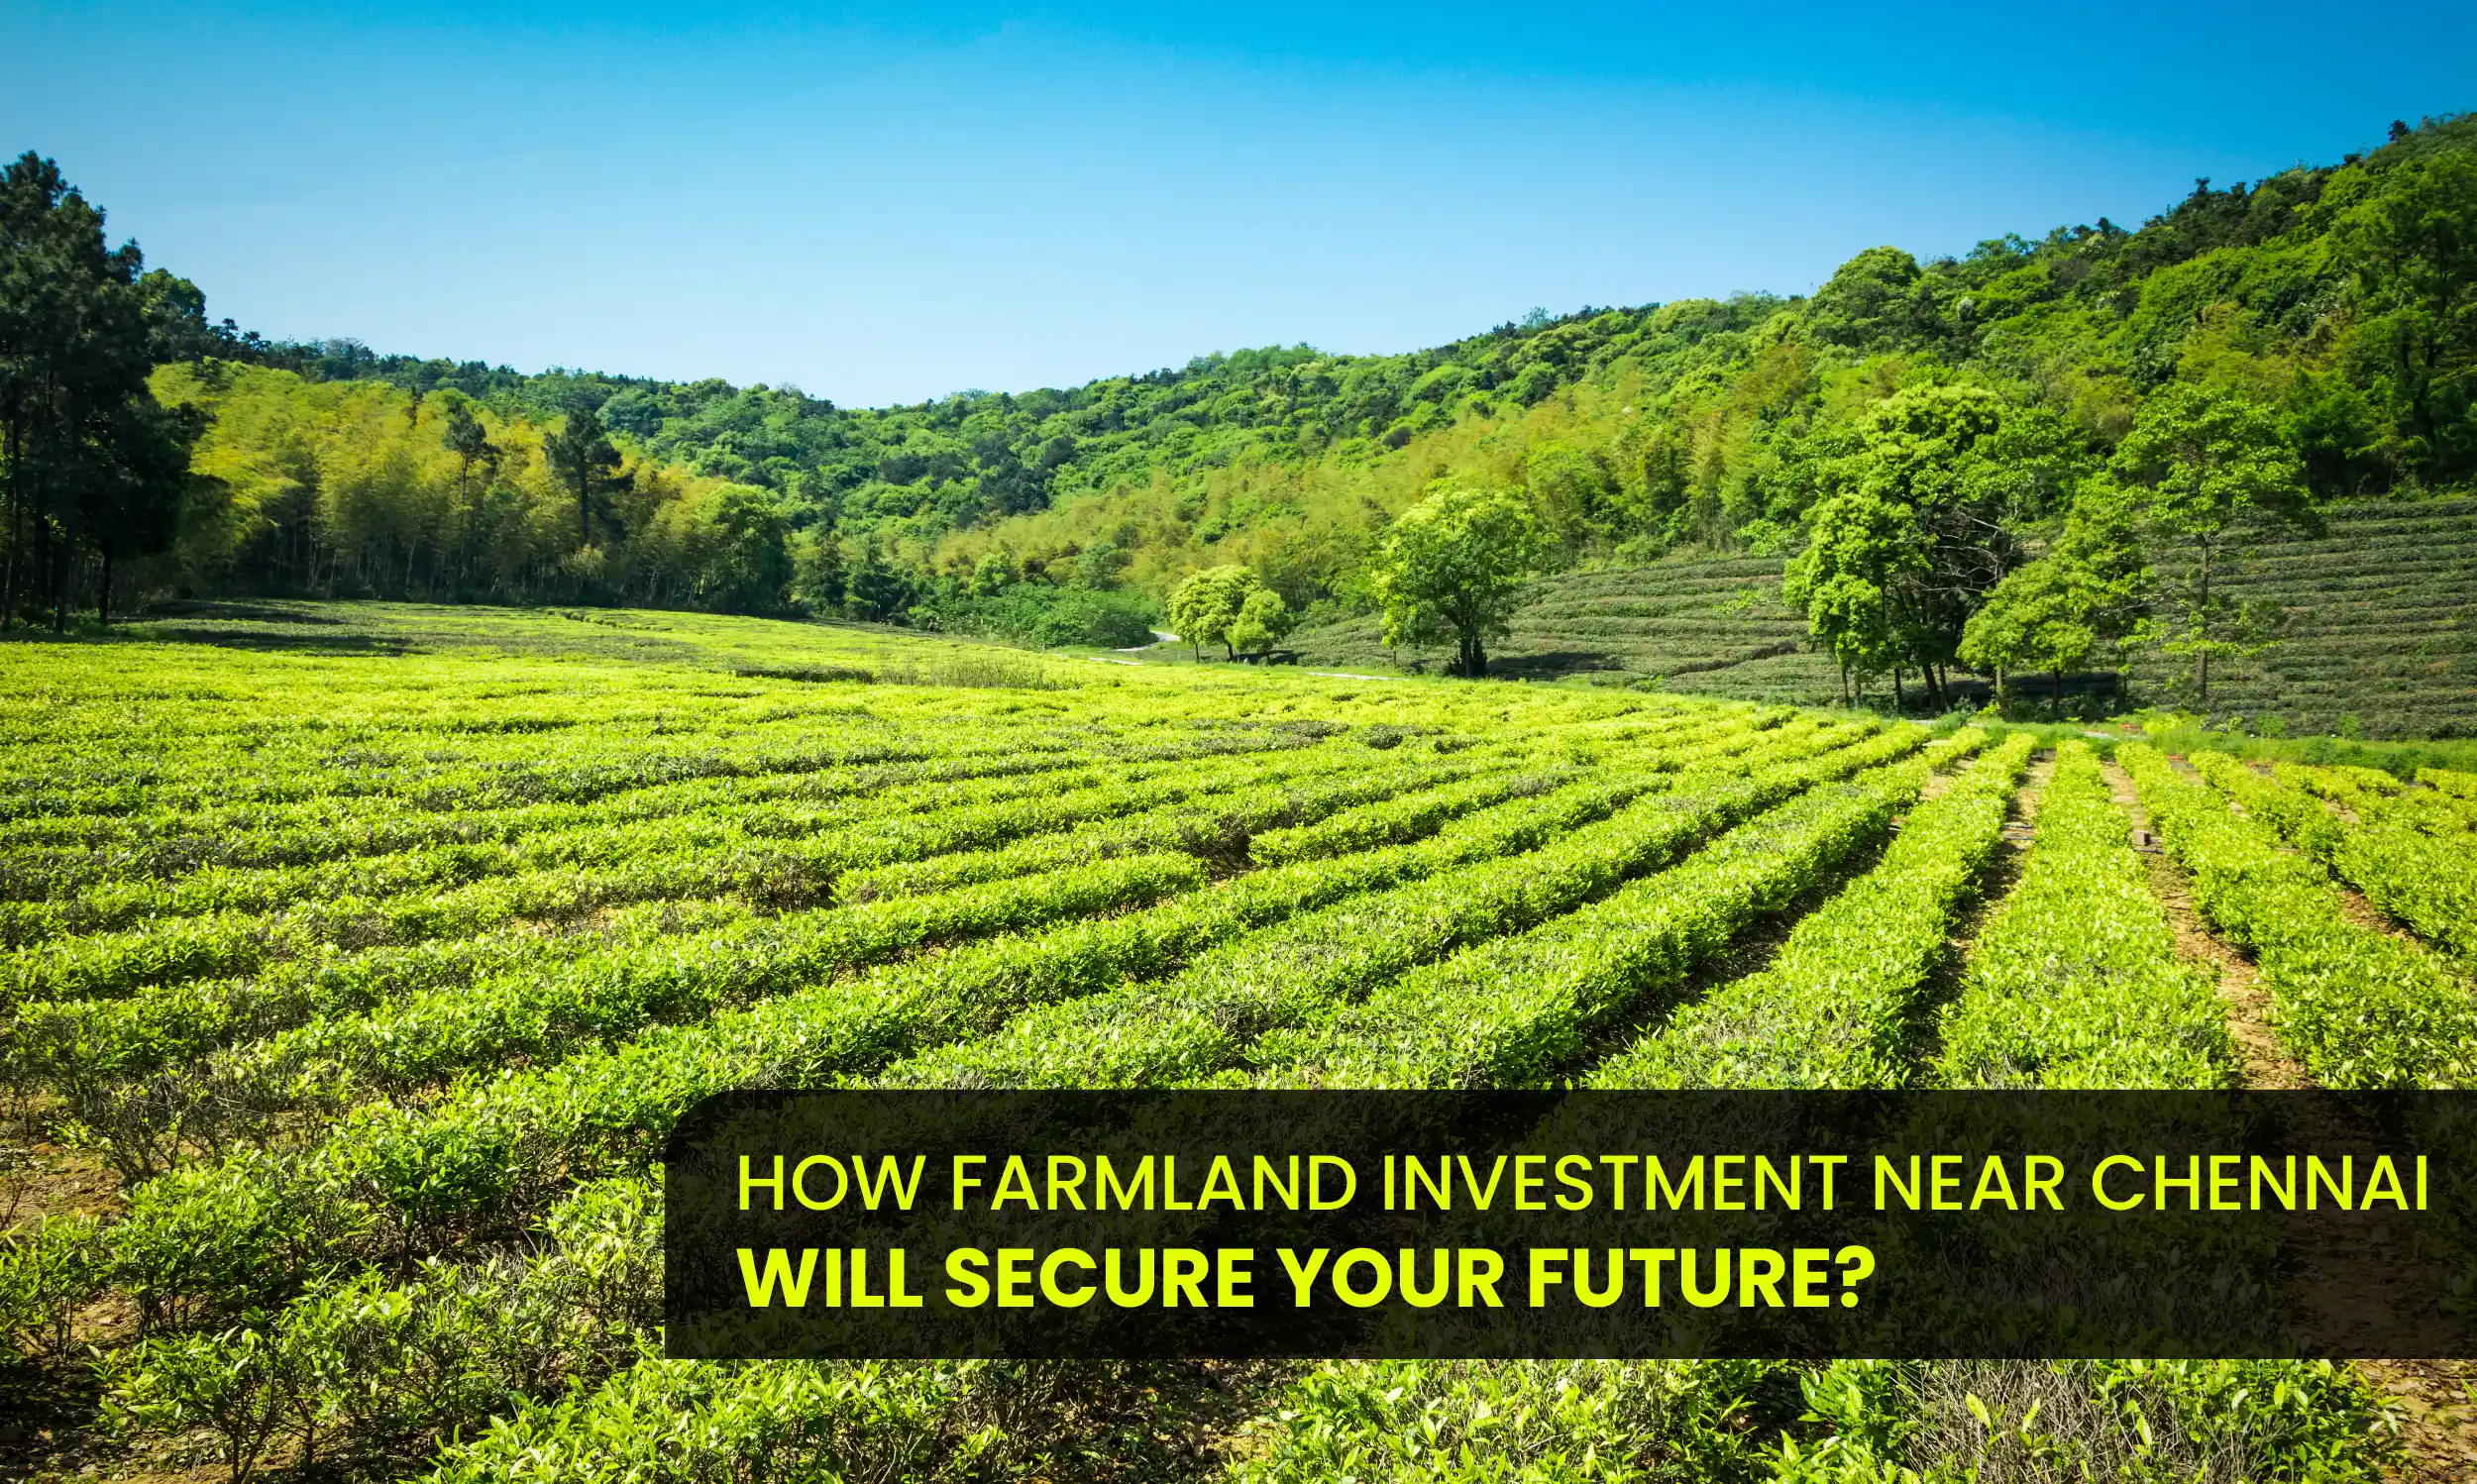 Secure Your Future with Farmland Investment Near Chennai